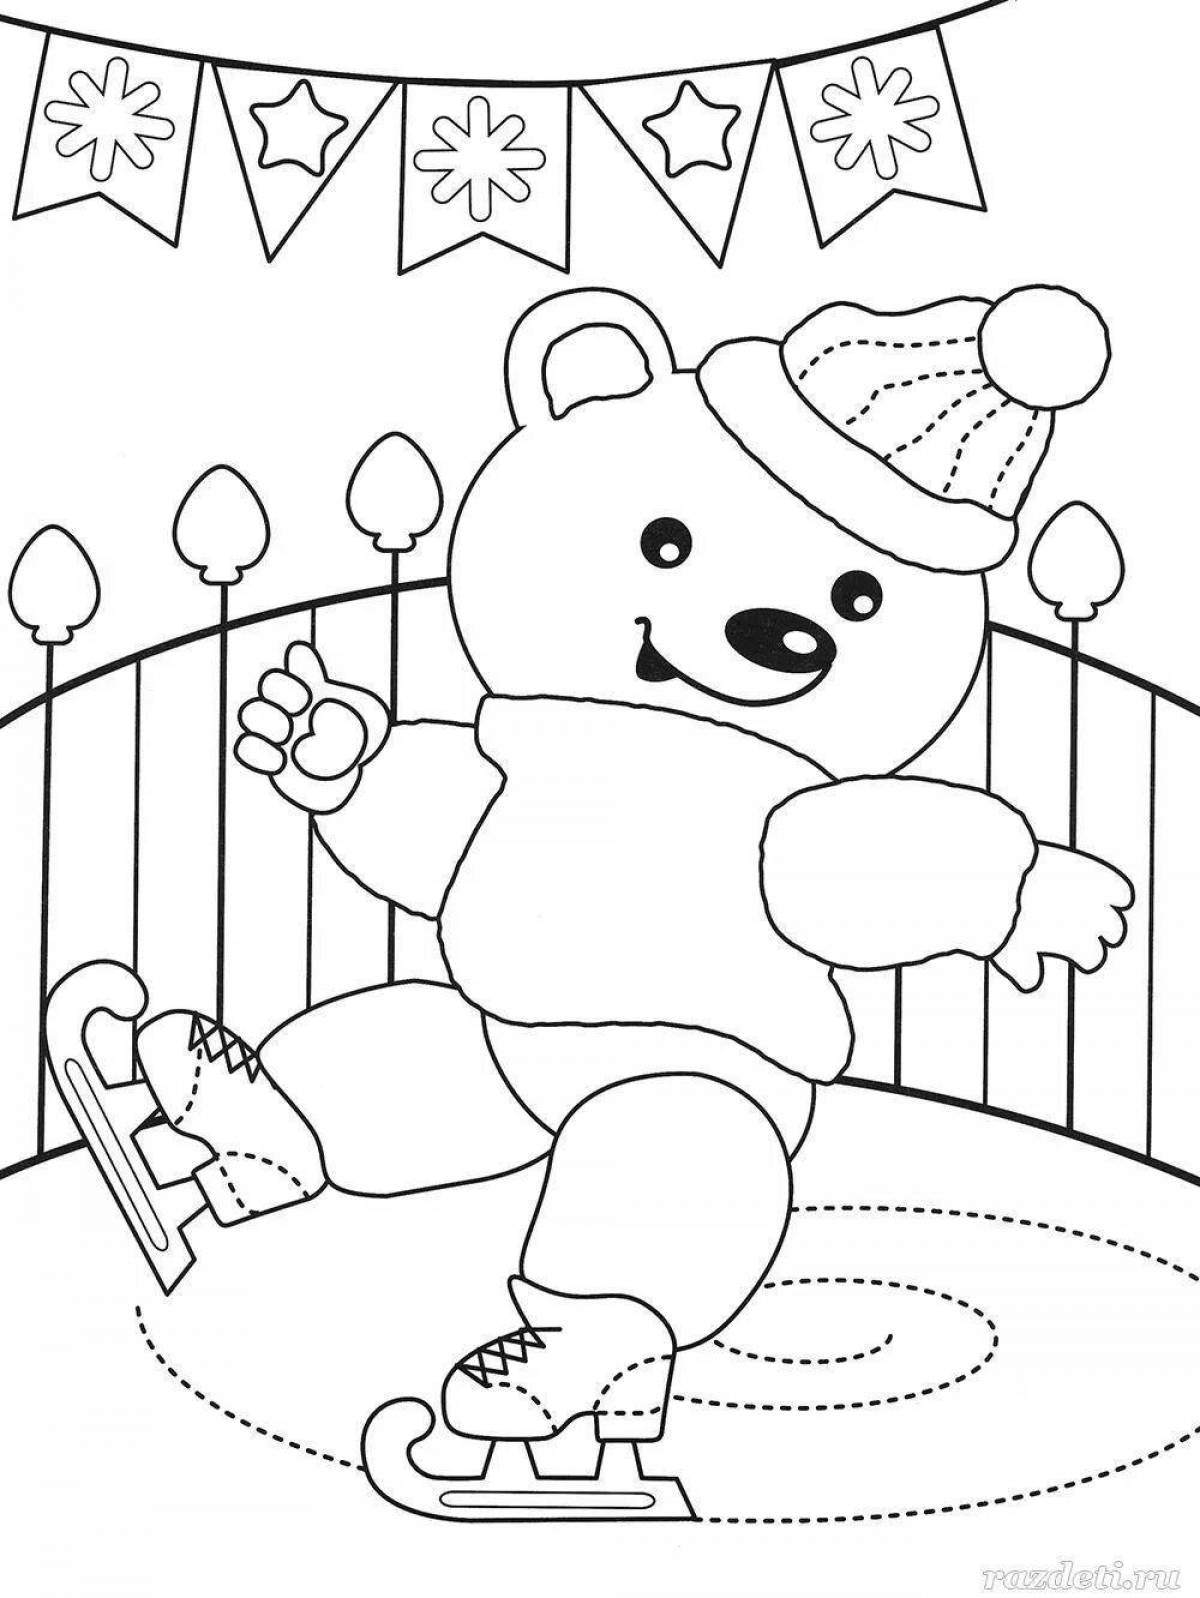 Radiant Christmas coloring book for preschoolers